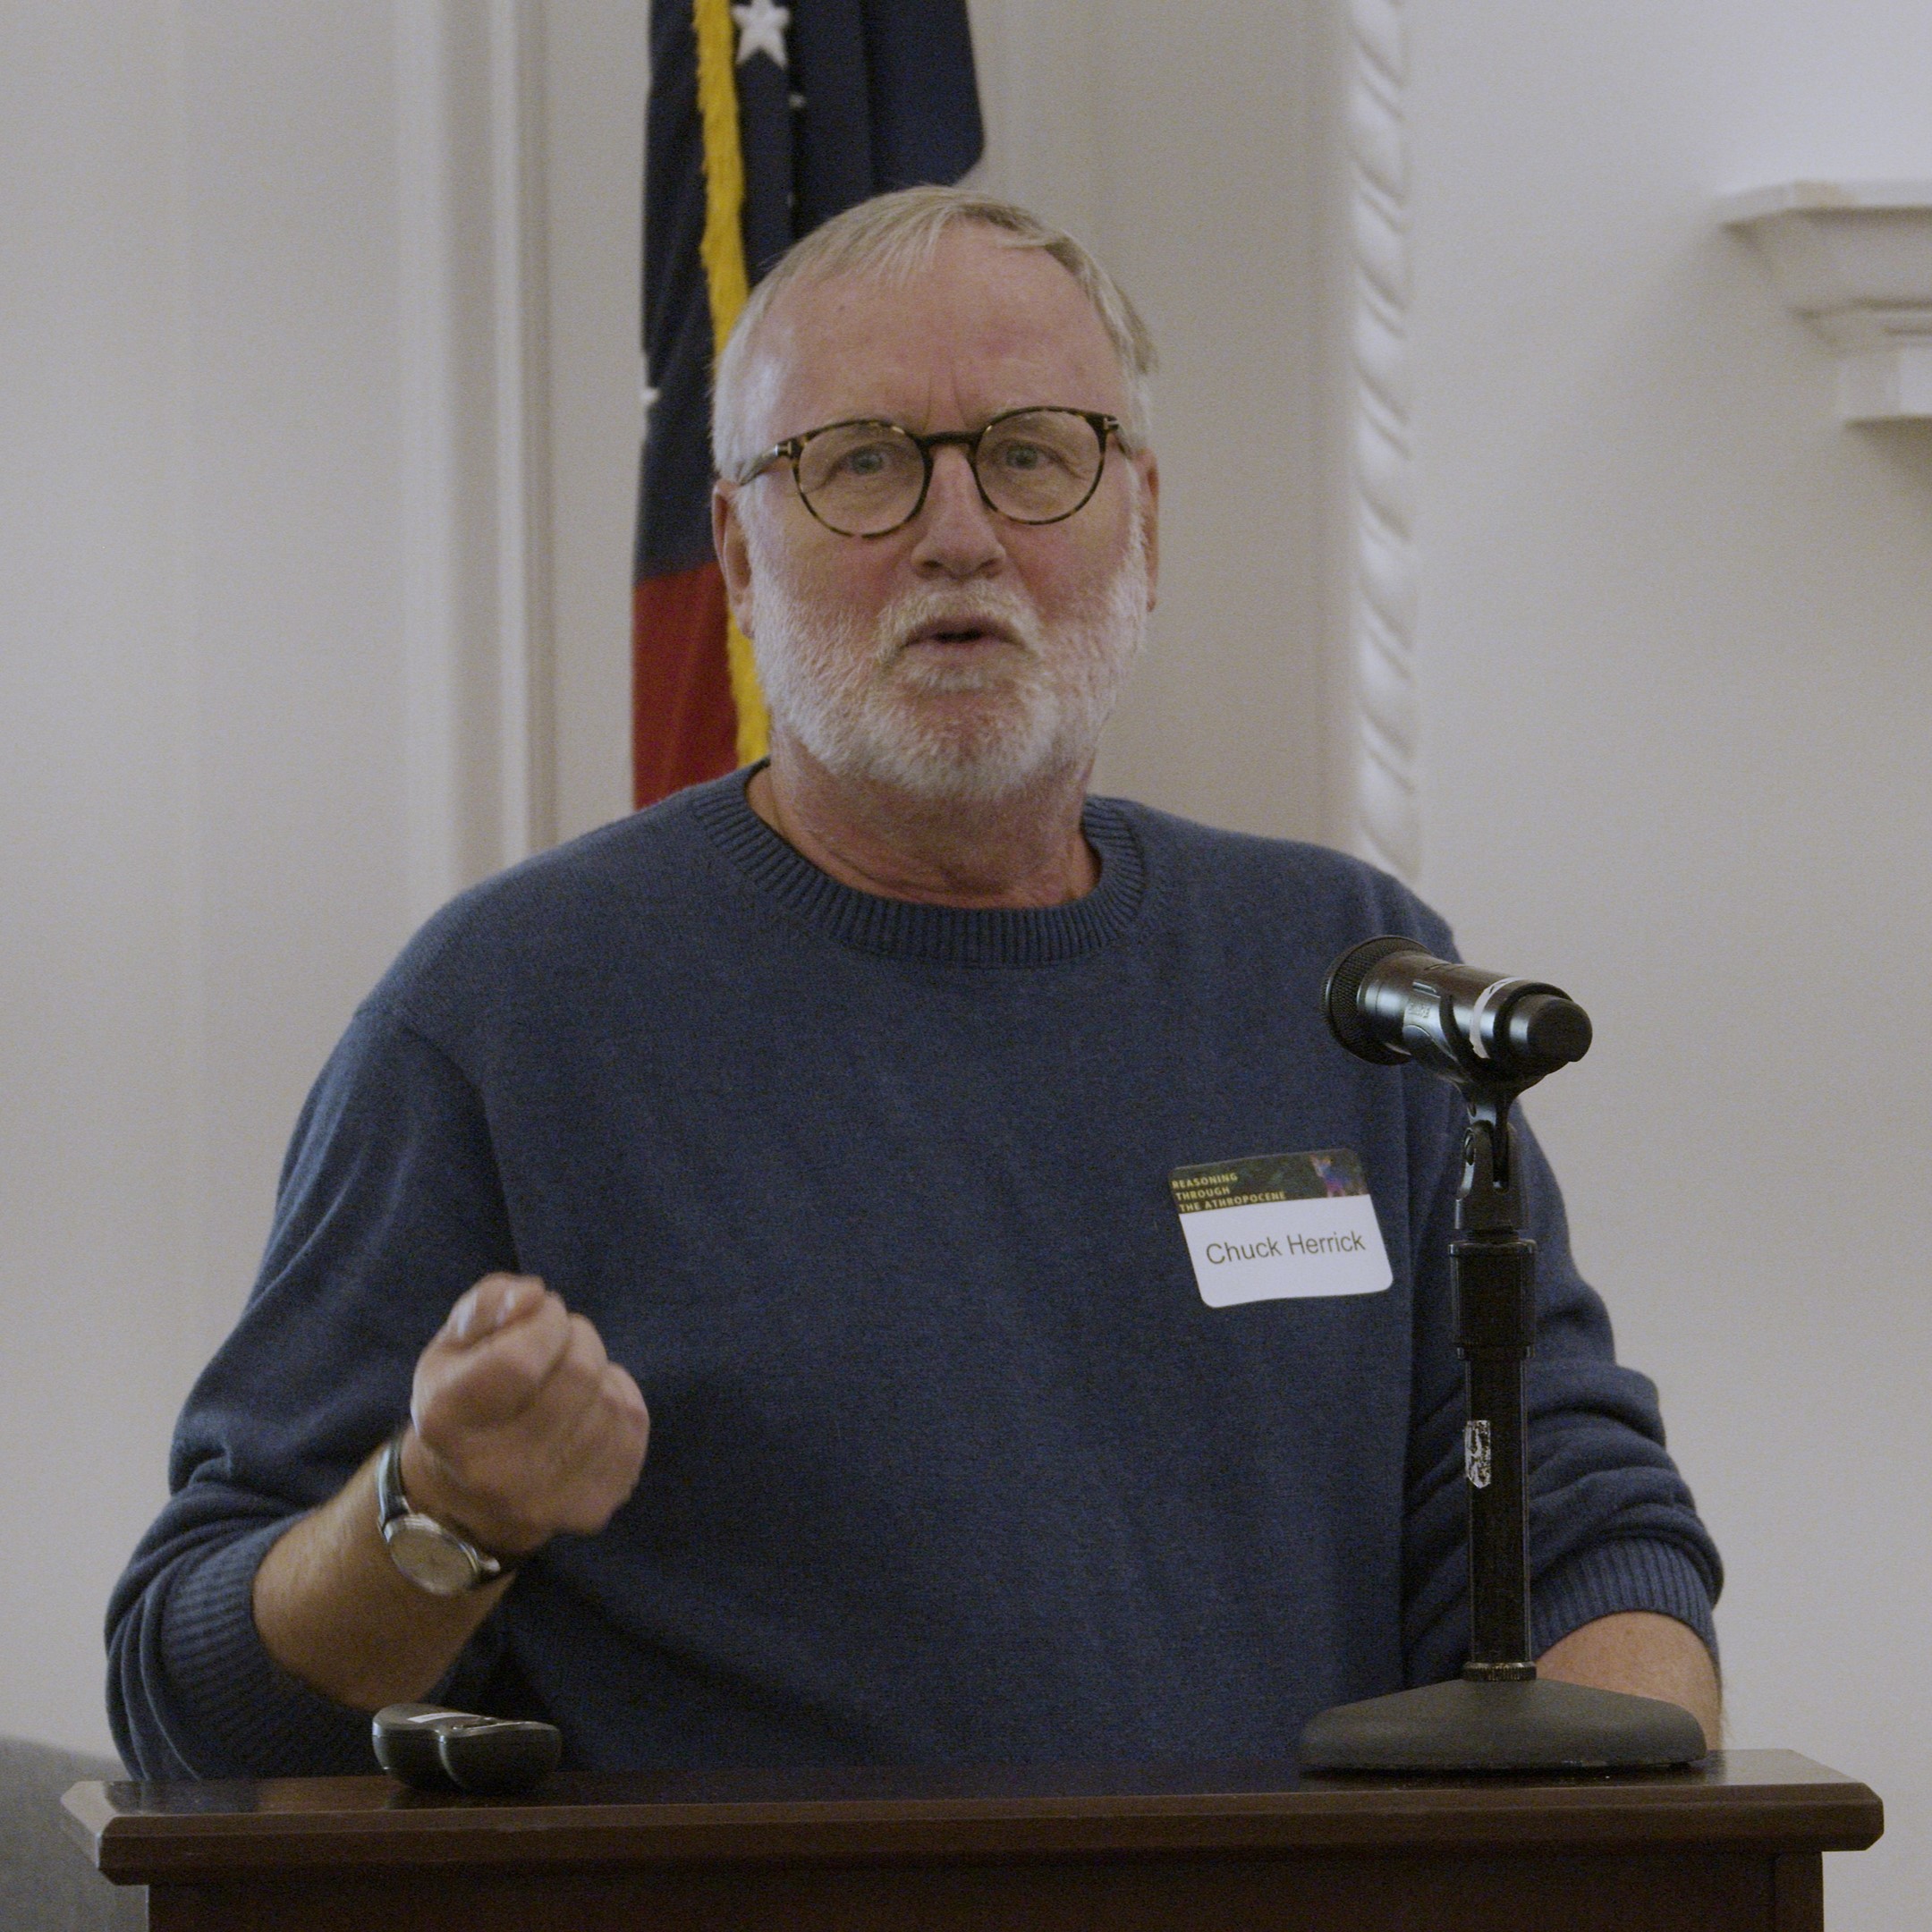 Photo of man in sweater presenting at a podium with an american flag behind him